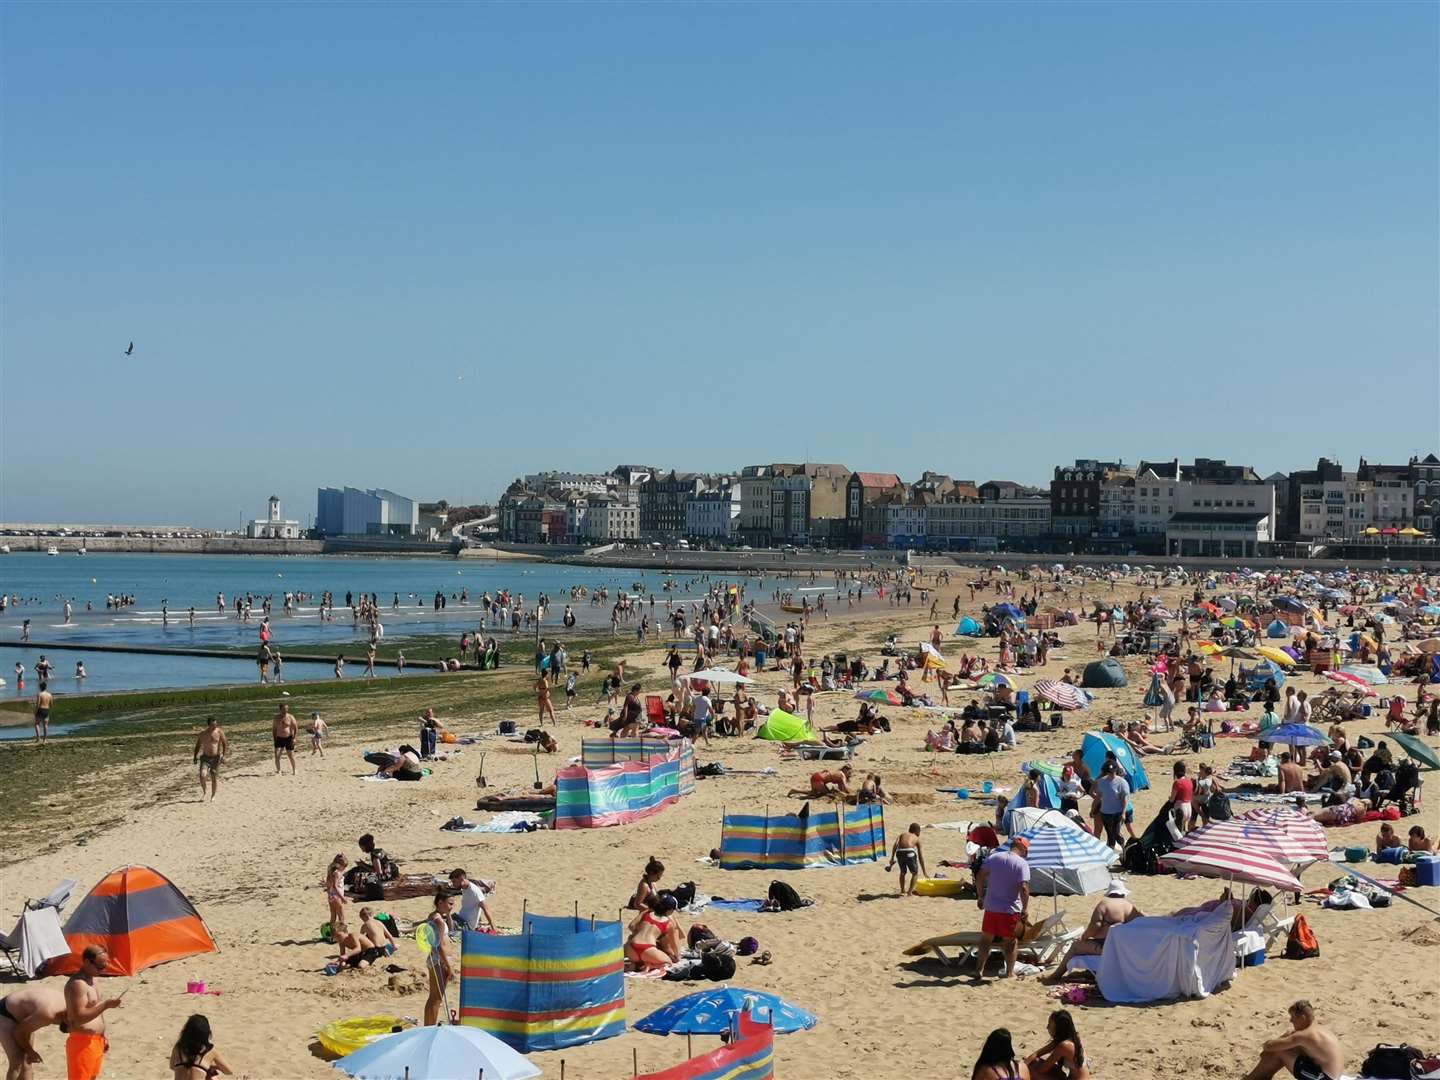 At the time, police appealed for any witnesses of the alleged attack on Margate beach to come forward